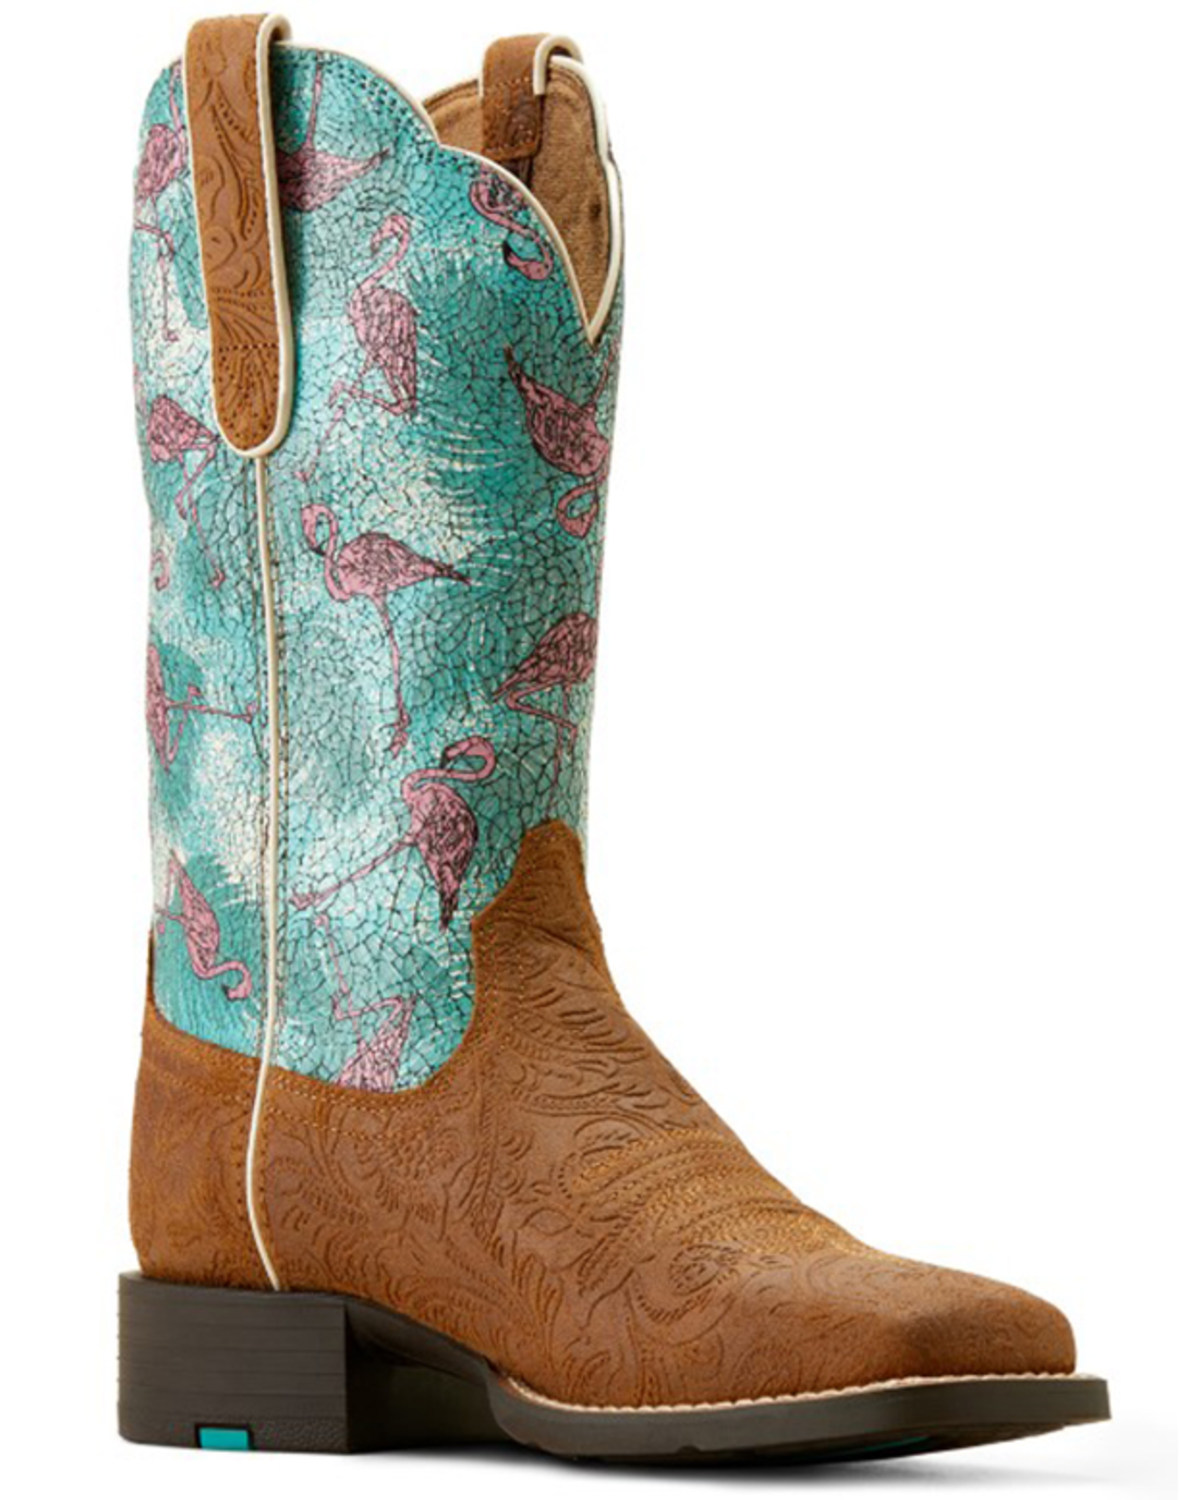 Ariat Women's Round Up Western Boots - Broad Square Toe